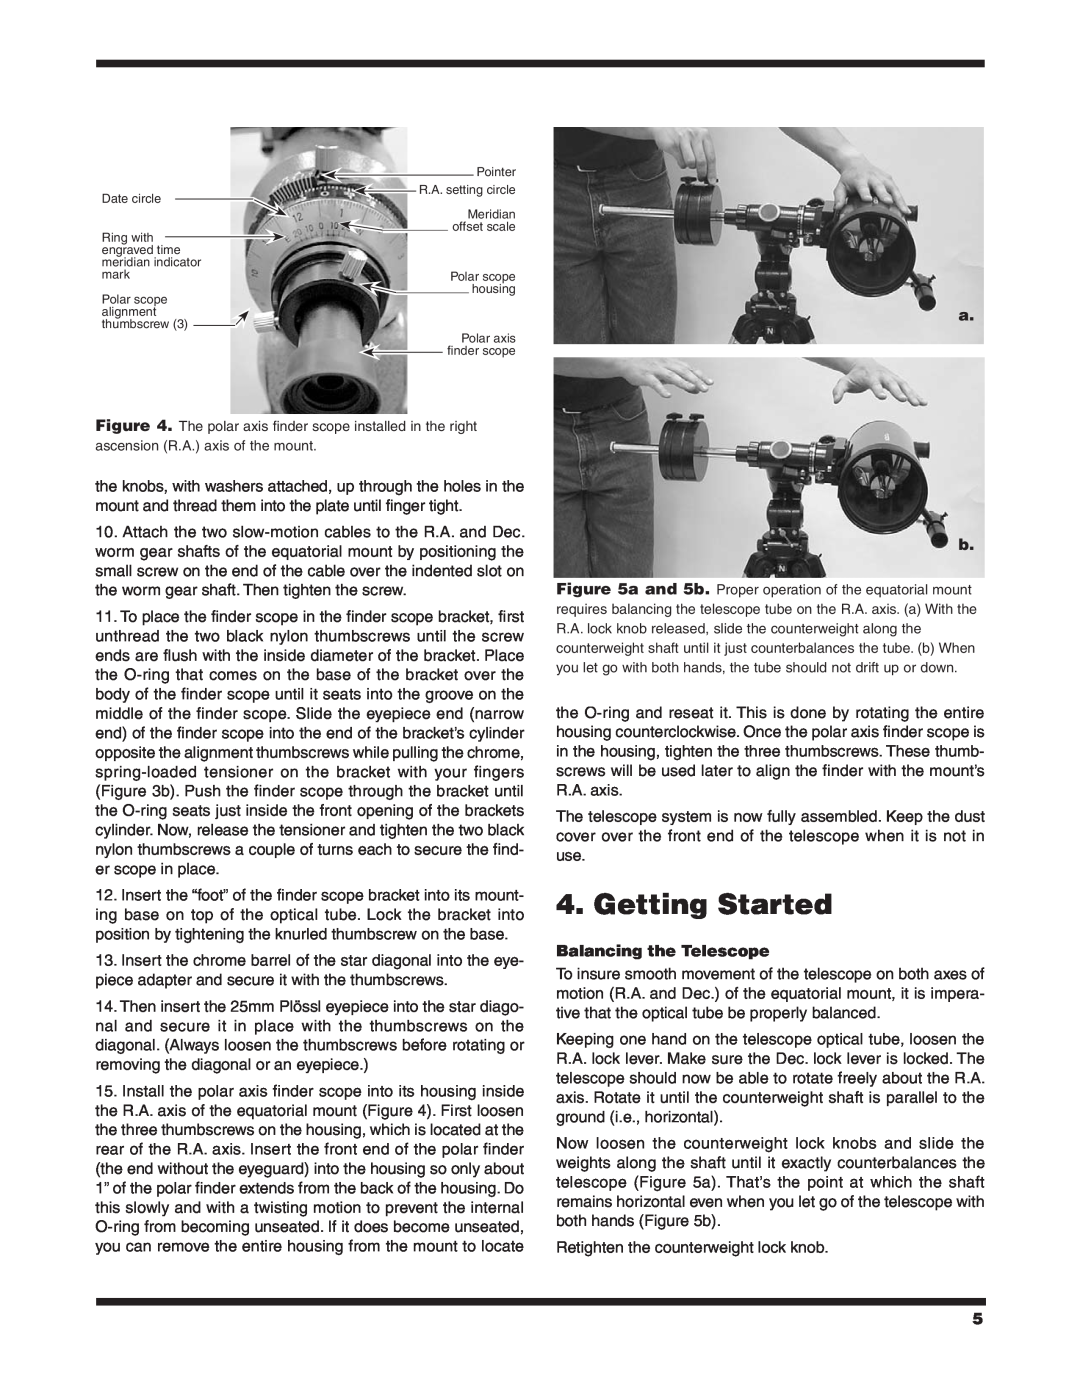 Orion 9826 instruction manual Getting Started, Balancing the Telescope 